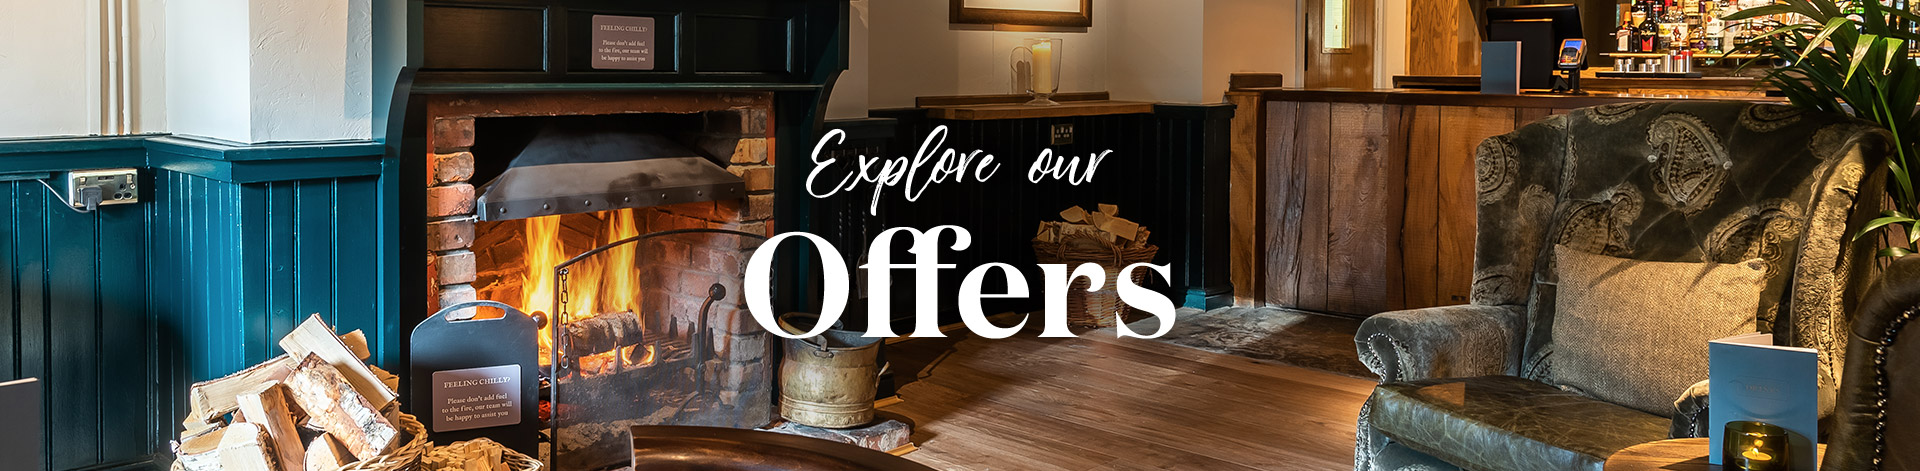 Our latest offers at The Swallow's Nest